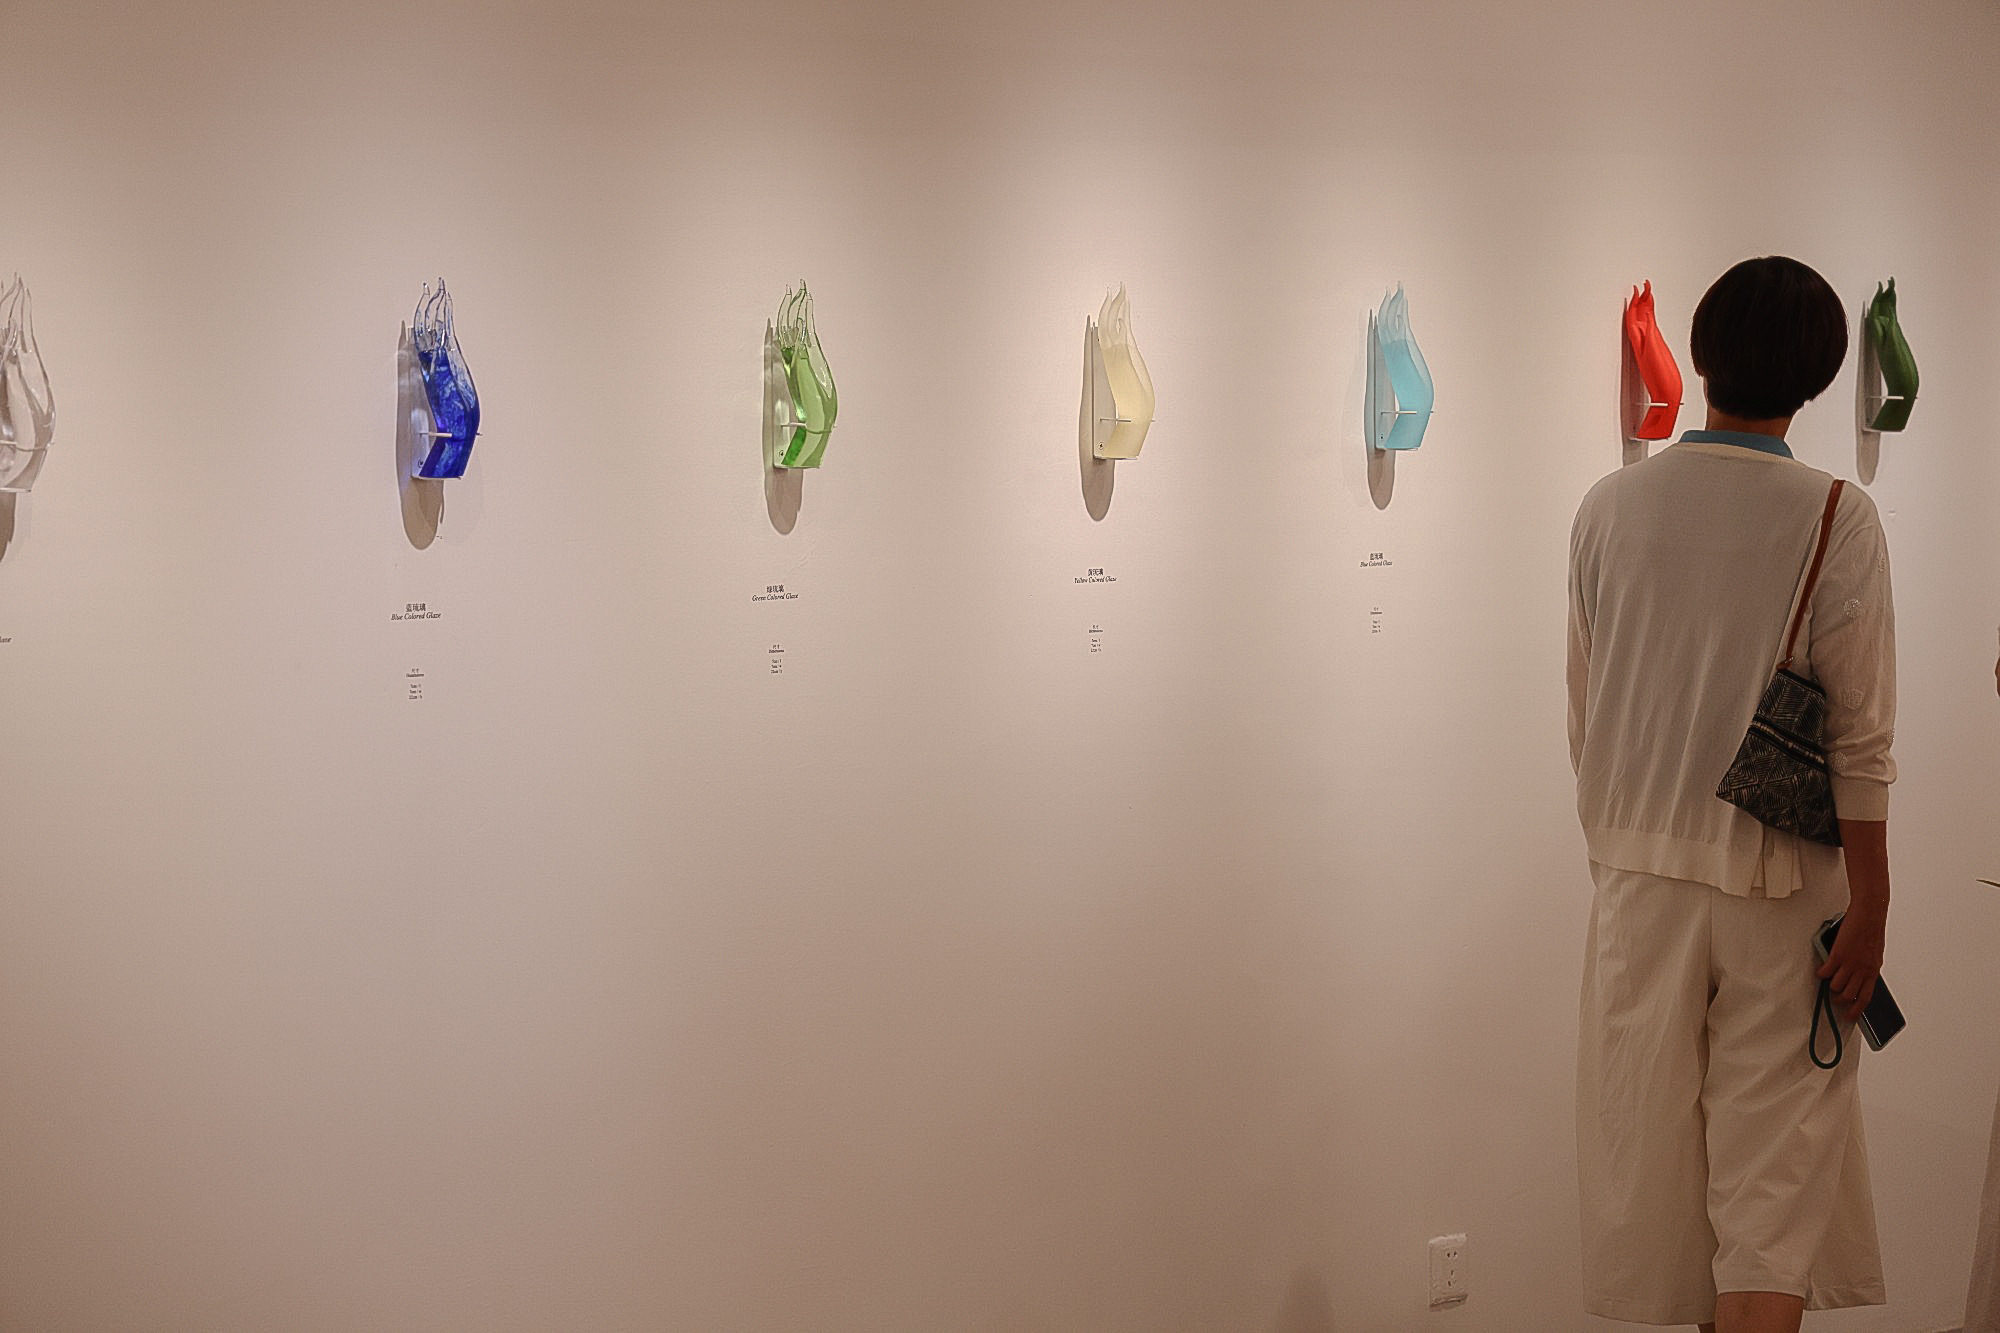 A visitor appreciates the artworks created by Chinese artist Jiang Sheng on display at the Topred Center for Contemporary Art in Xiamen, Fujian Province. /TCCA